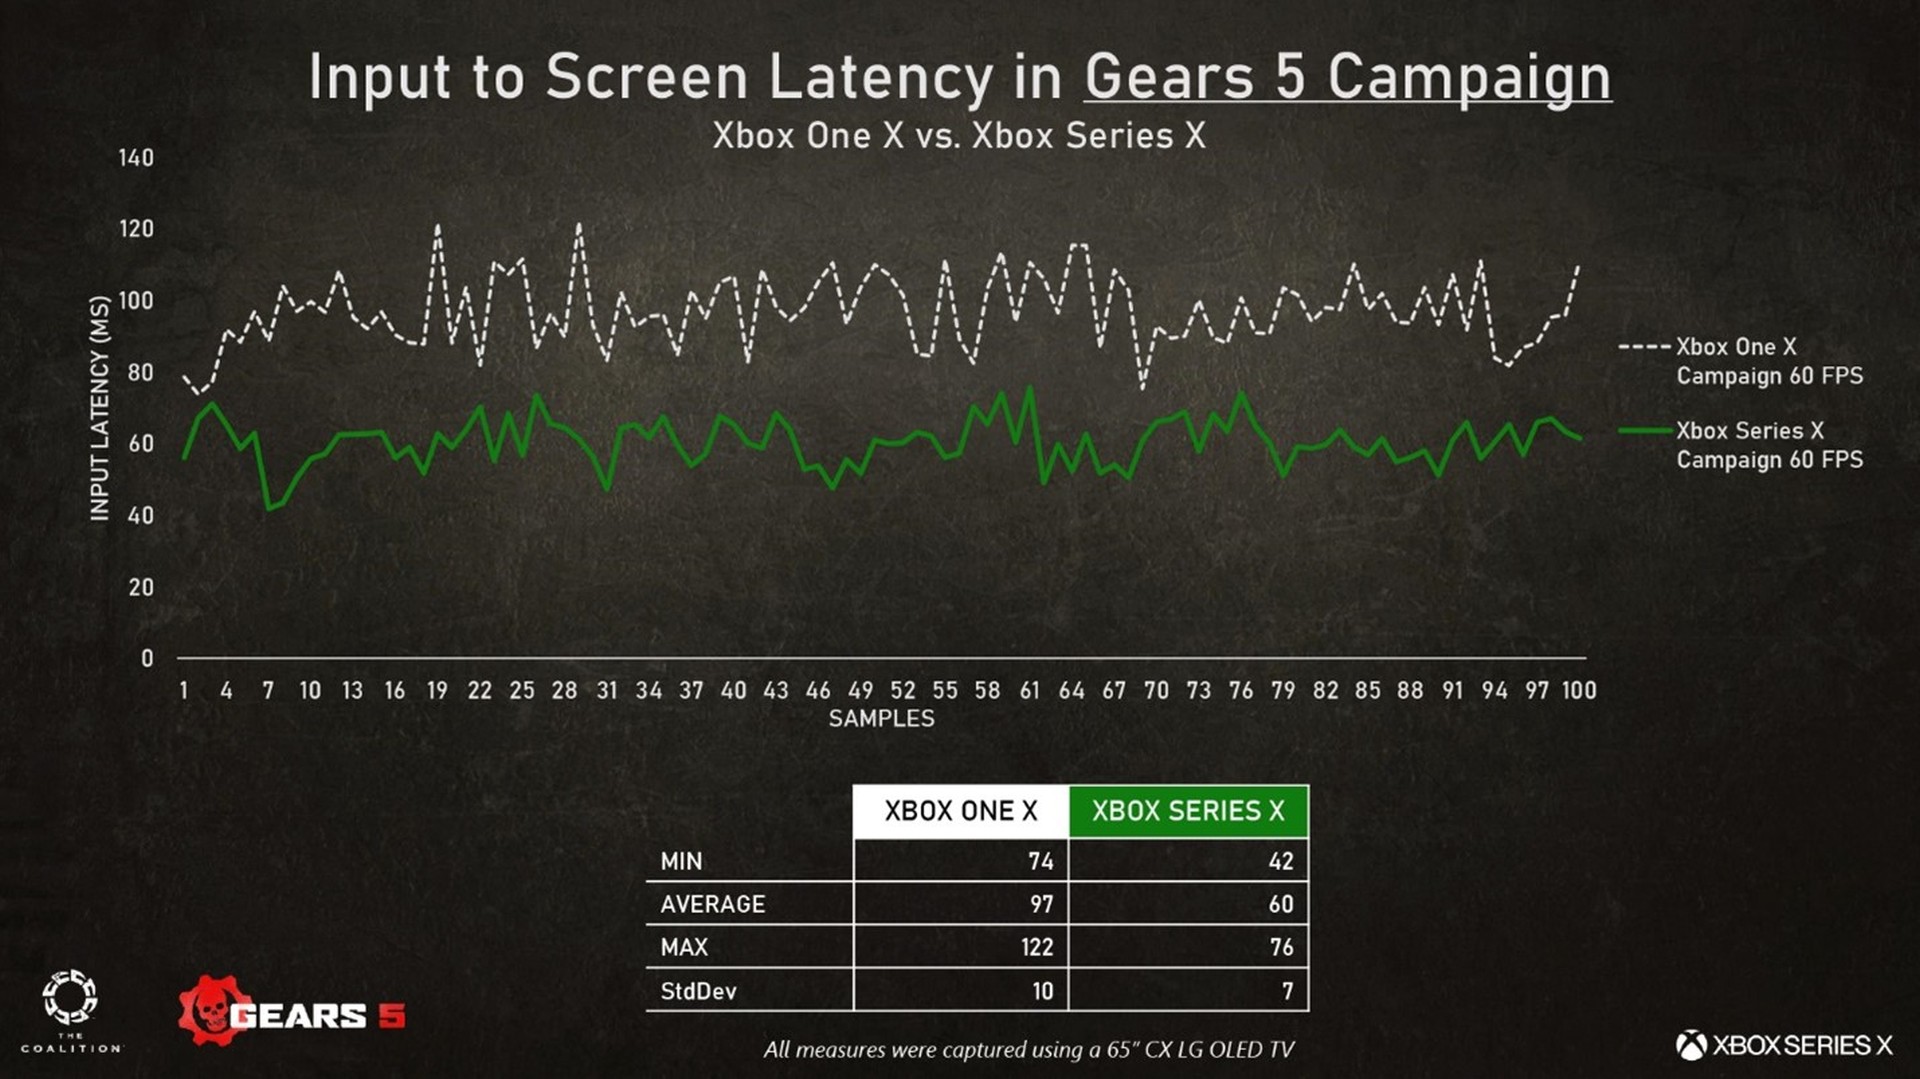 input to screen Latency in Gears 5 campaign xbox one x campaign 60 FPS versus xbox series x campaign 60 FPS measures were captured using a 65 inches cx lg oled TV, The values are xbox one x min 74, xbox series x min value 42, xbox one x average 97, xbox series x average 60, xbox one x max 122, xbox series x max 76, xbox one x StdDev 10, xbox series x stdDev 7